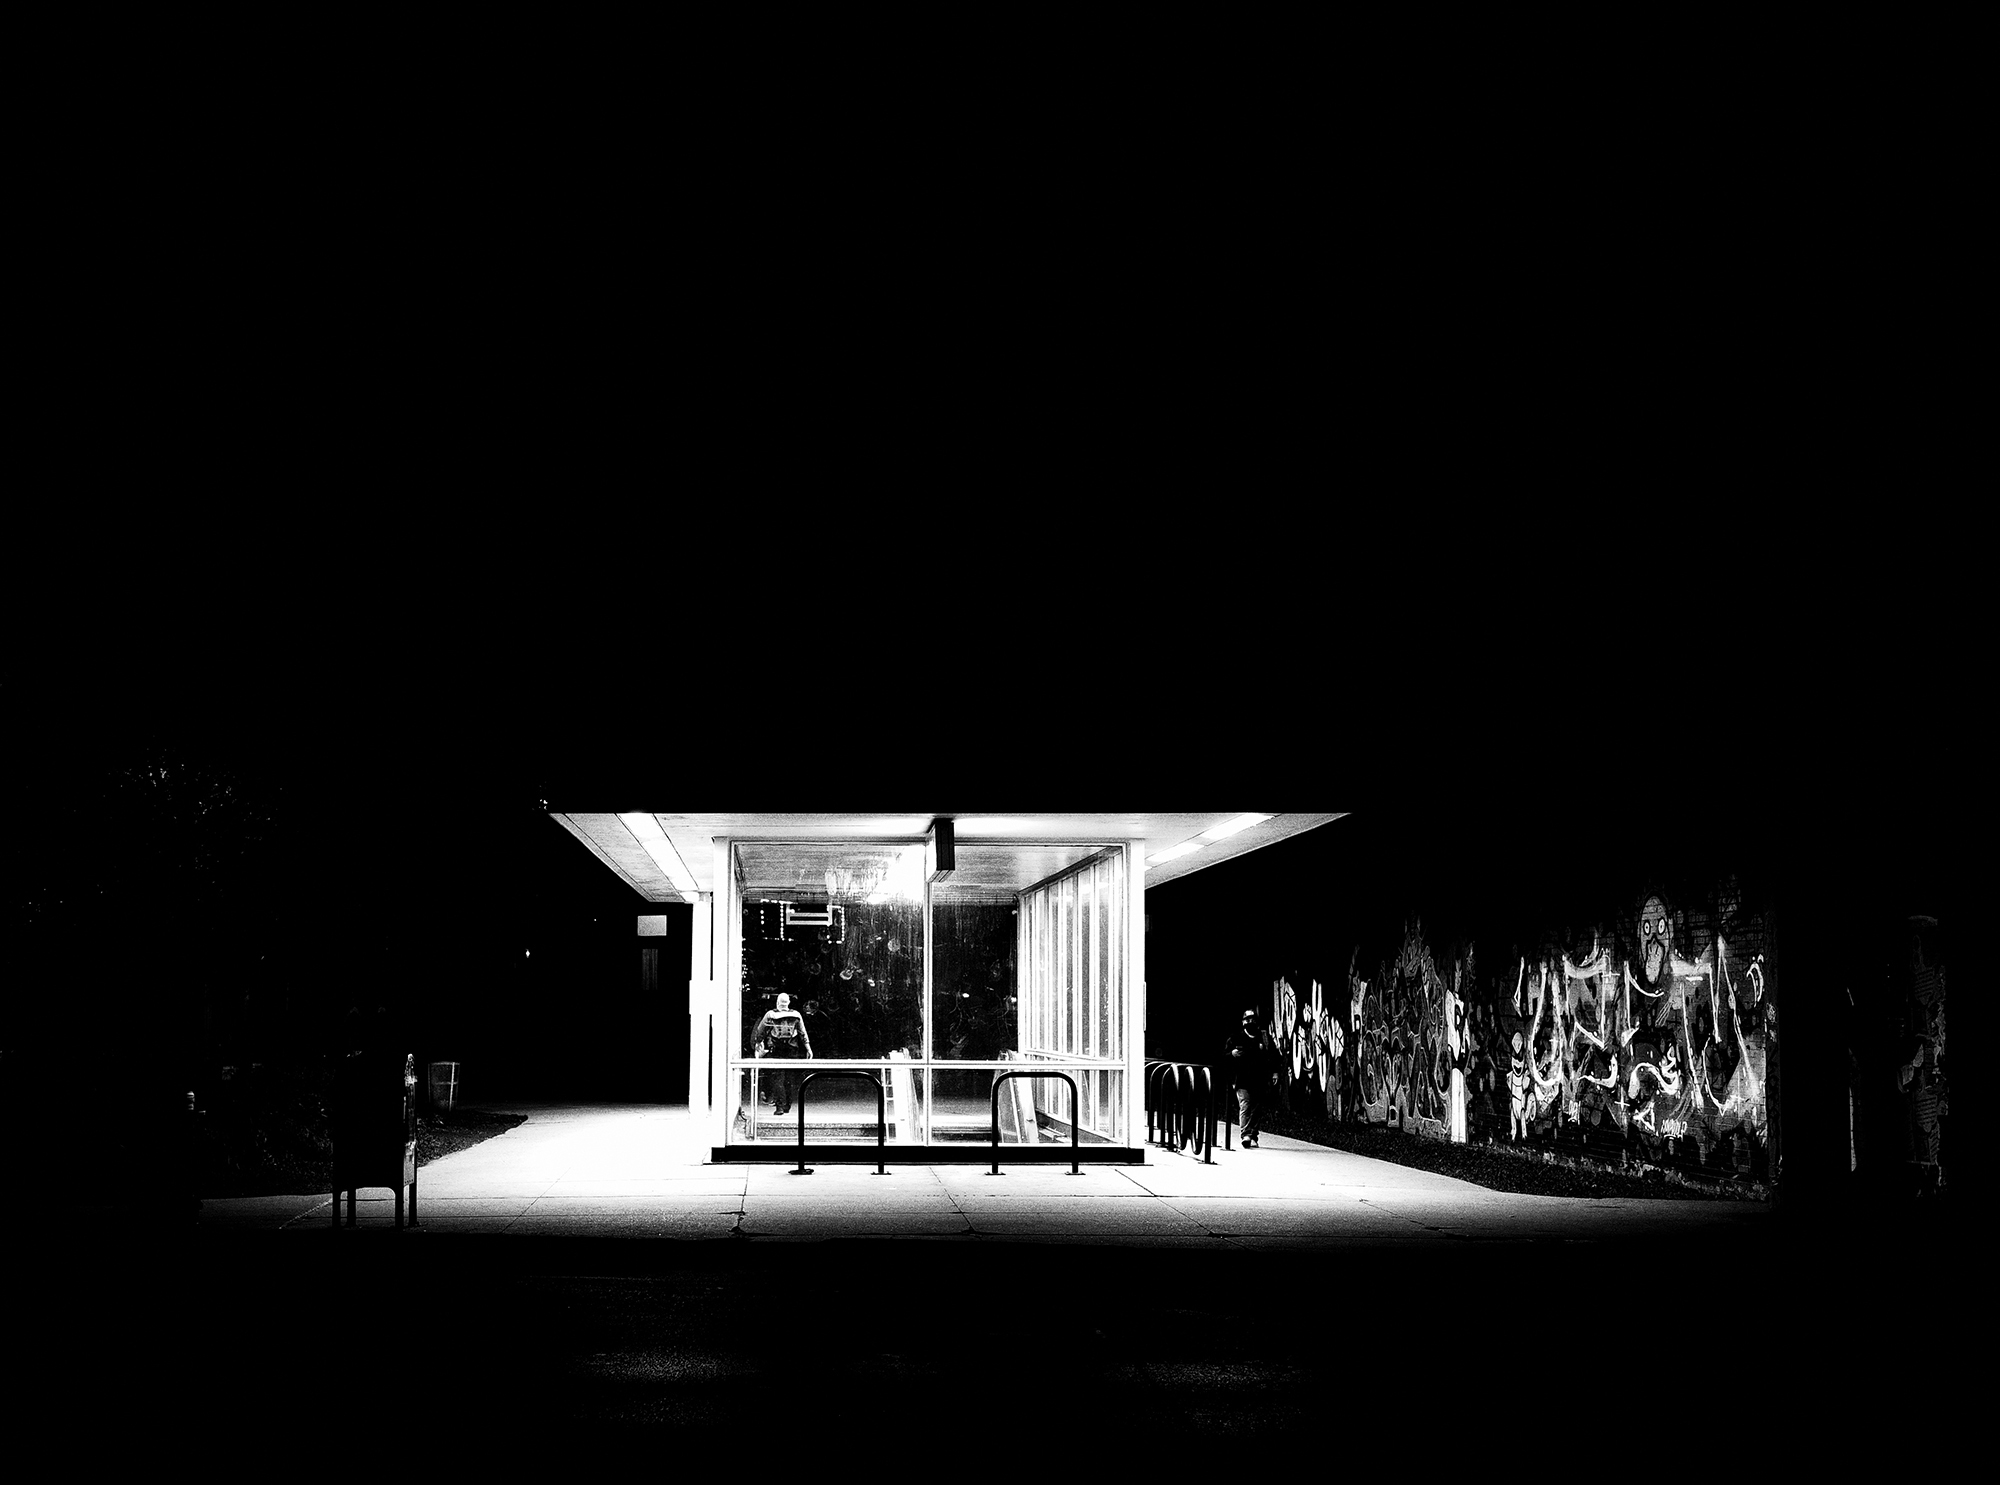 <p>Commuters emerge from one of Chicago's metro stations into a dark night.</p>